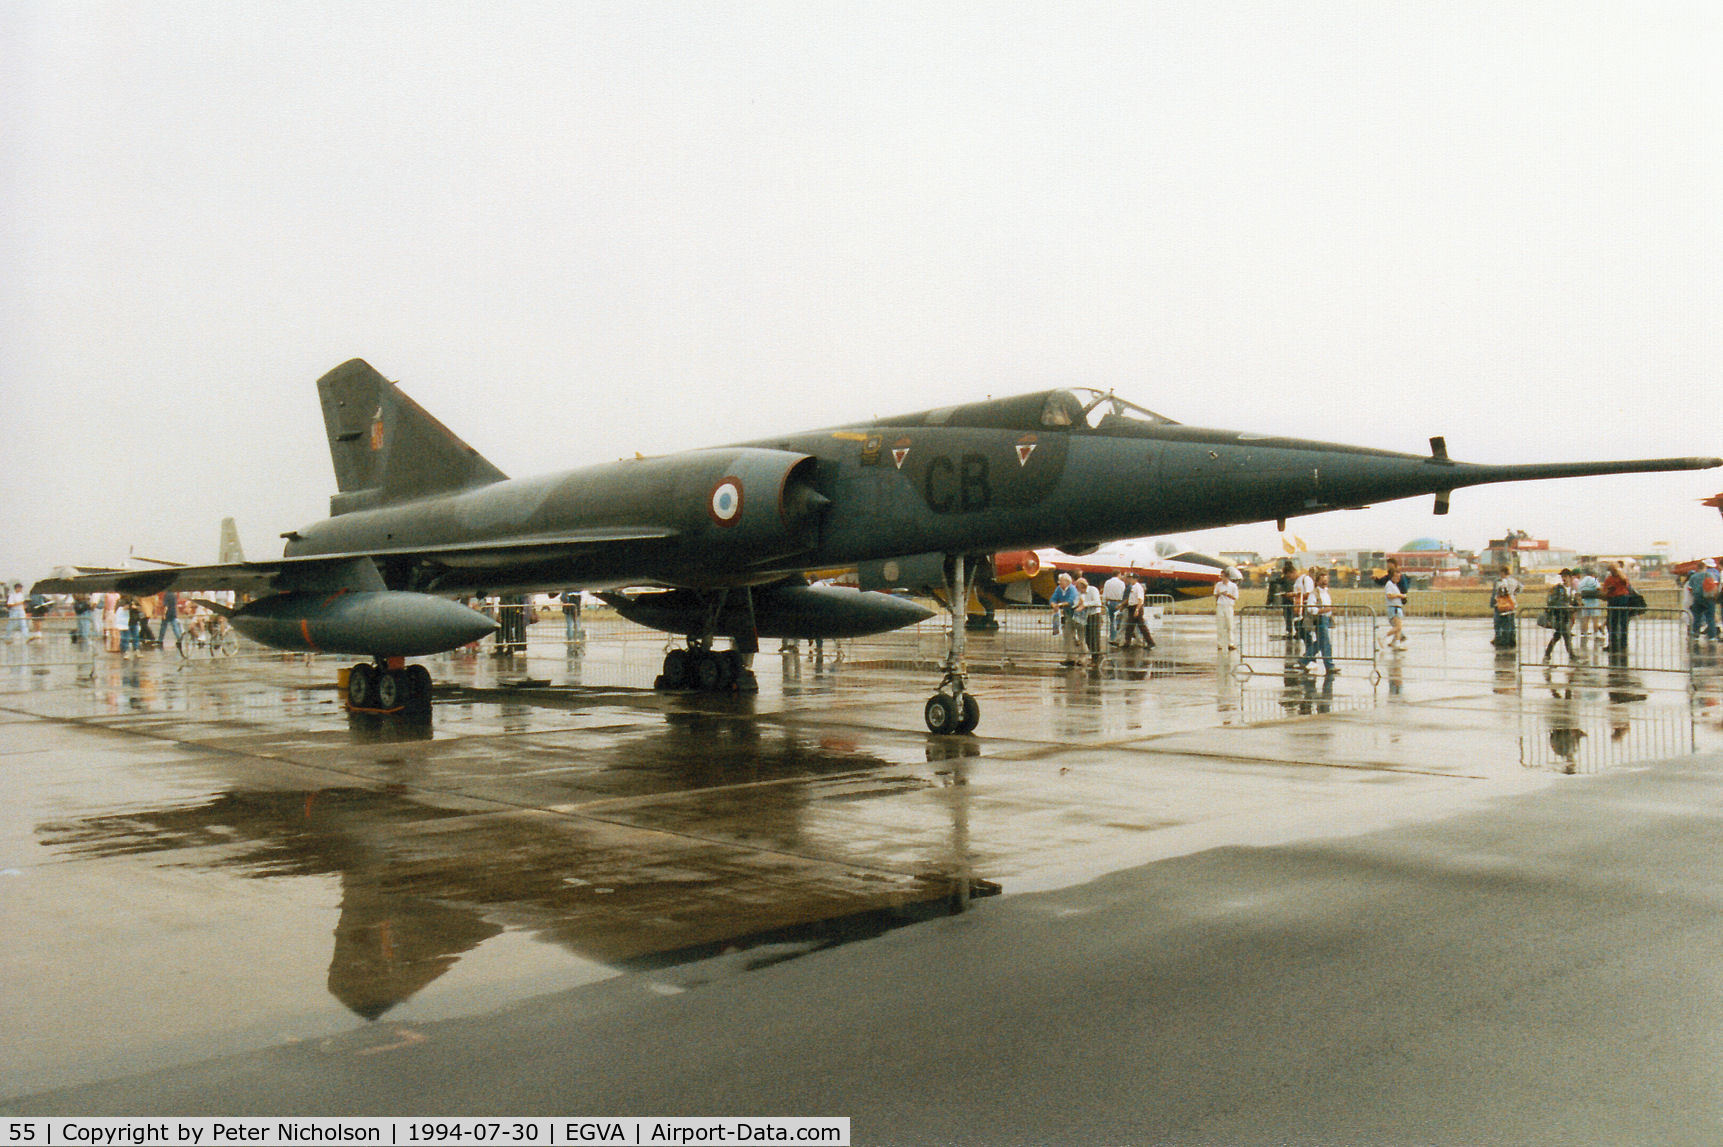 55, Dassault Mirage IVP C/N 55, Mirage IVP, callsign French Air Force 1490, of EB01.091 on display at the 1994 Intnl Air Tattoo at RAF Fairford.